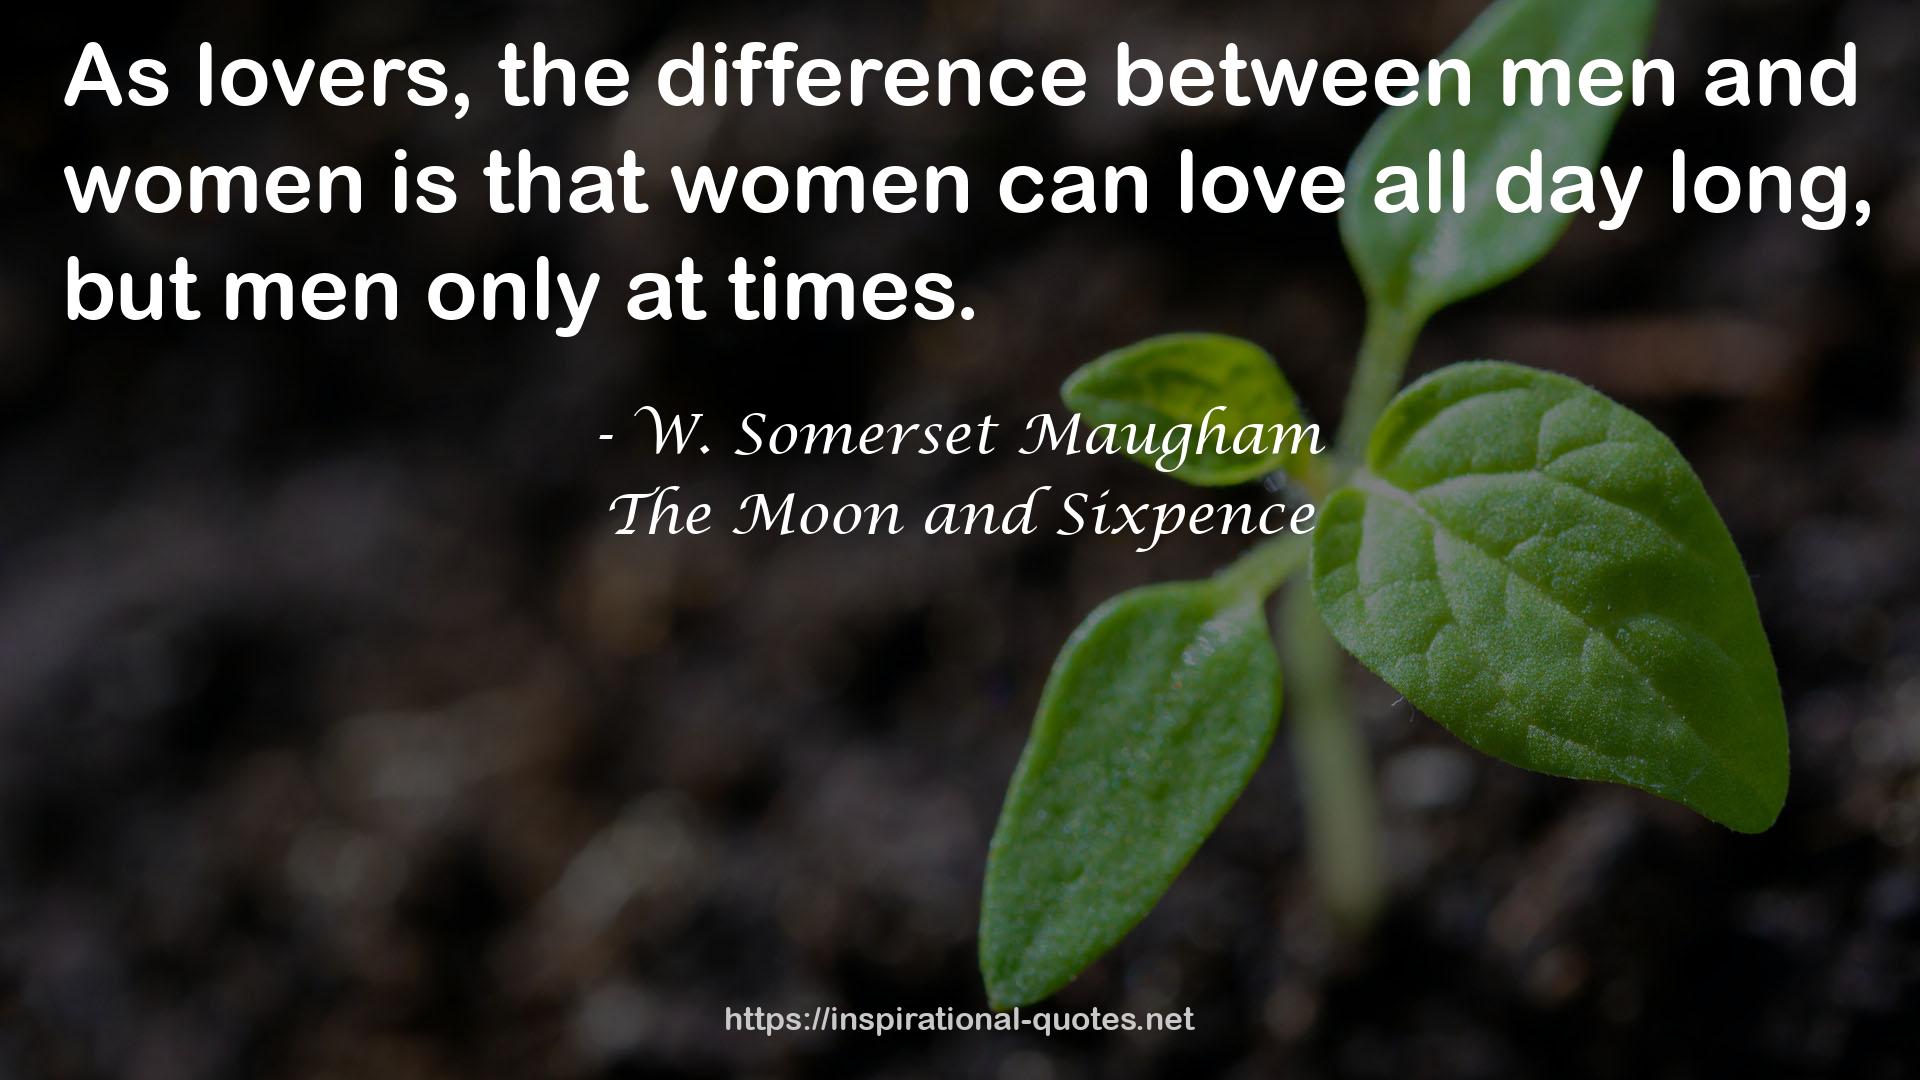 The Moon and Sixpence QUOTES